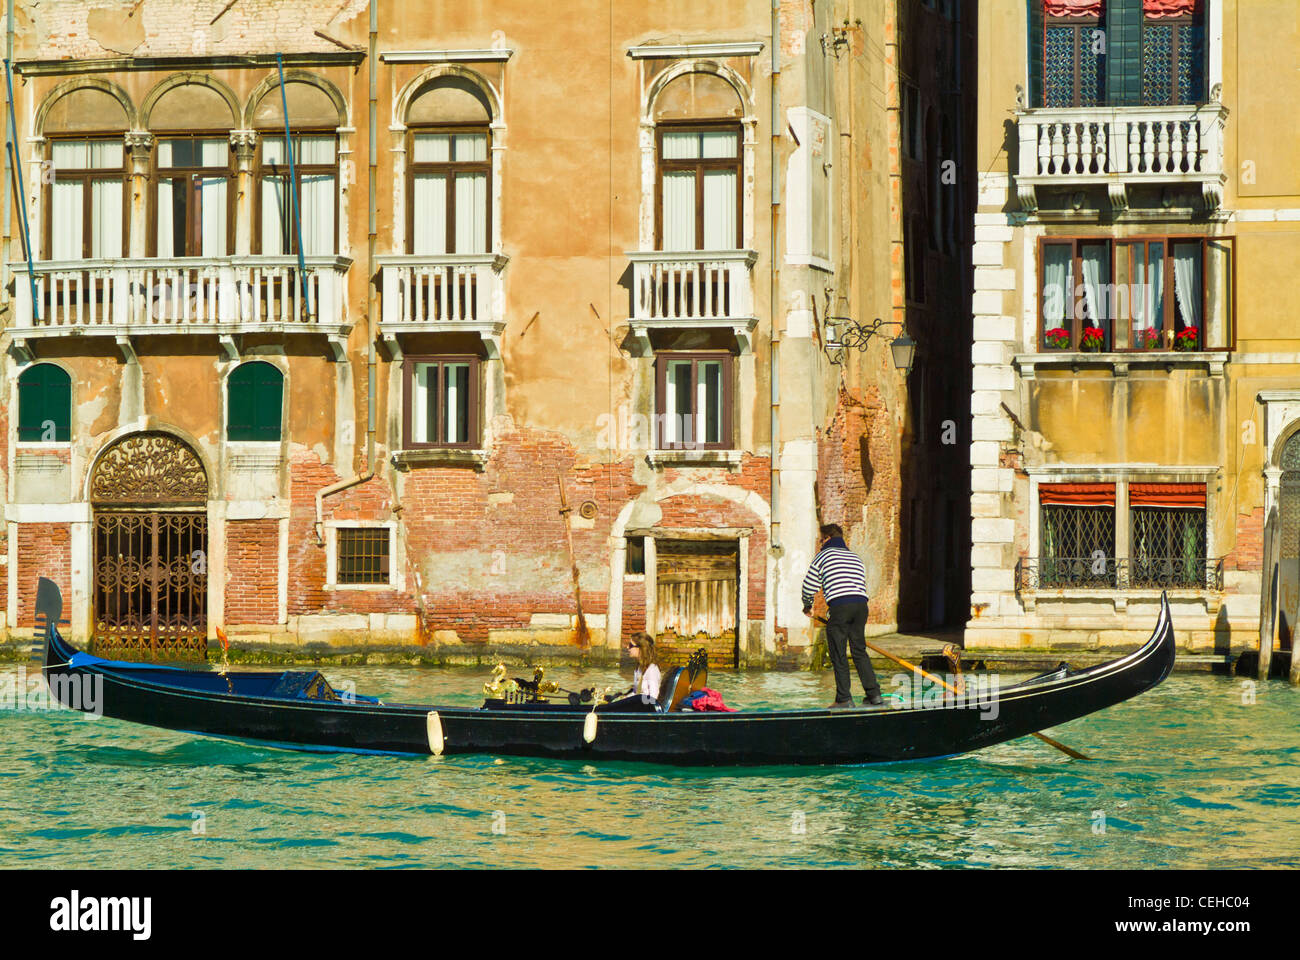 gondolier rowing a gondola with two tourists in it along a canal in front of a palazzo Venice italy ey europe Stock Photo